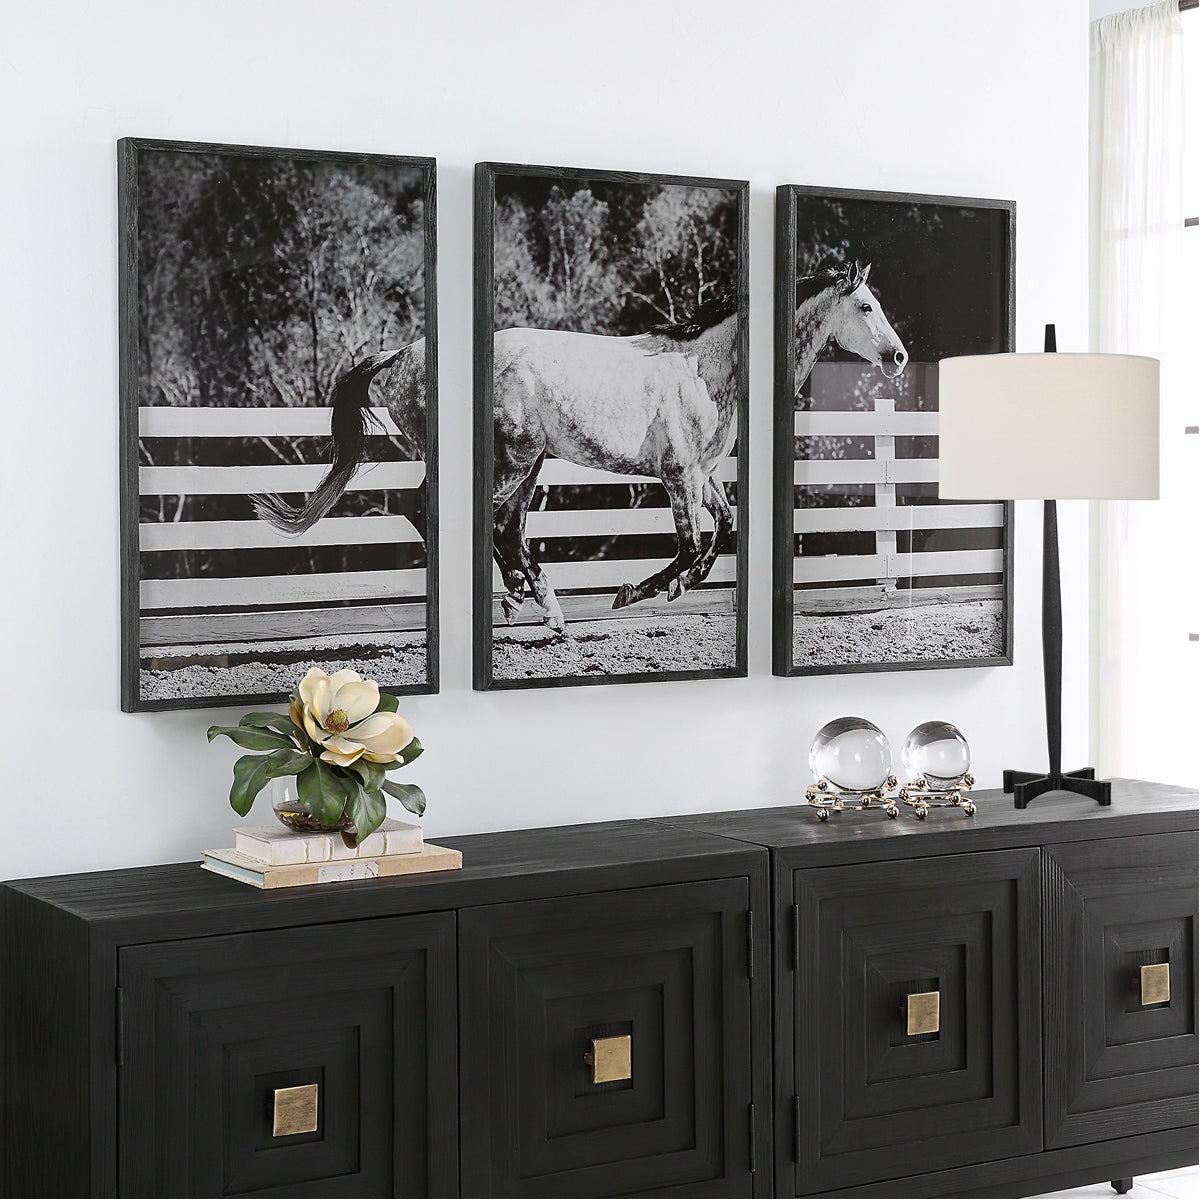 Uttermost Galloping Forward Equine Prints, 3-Piece Set